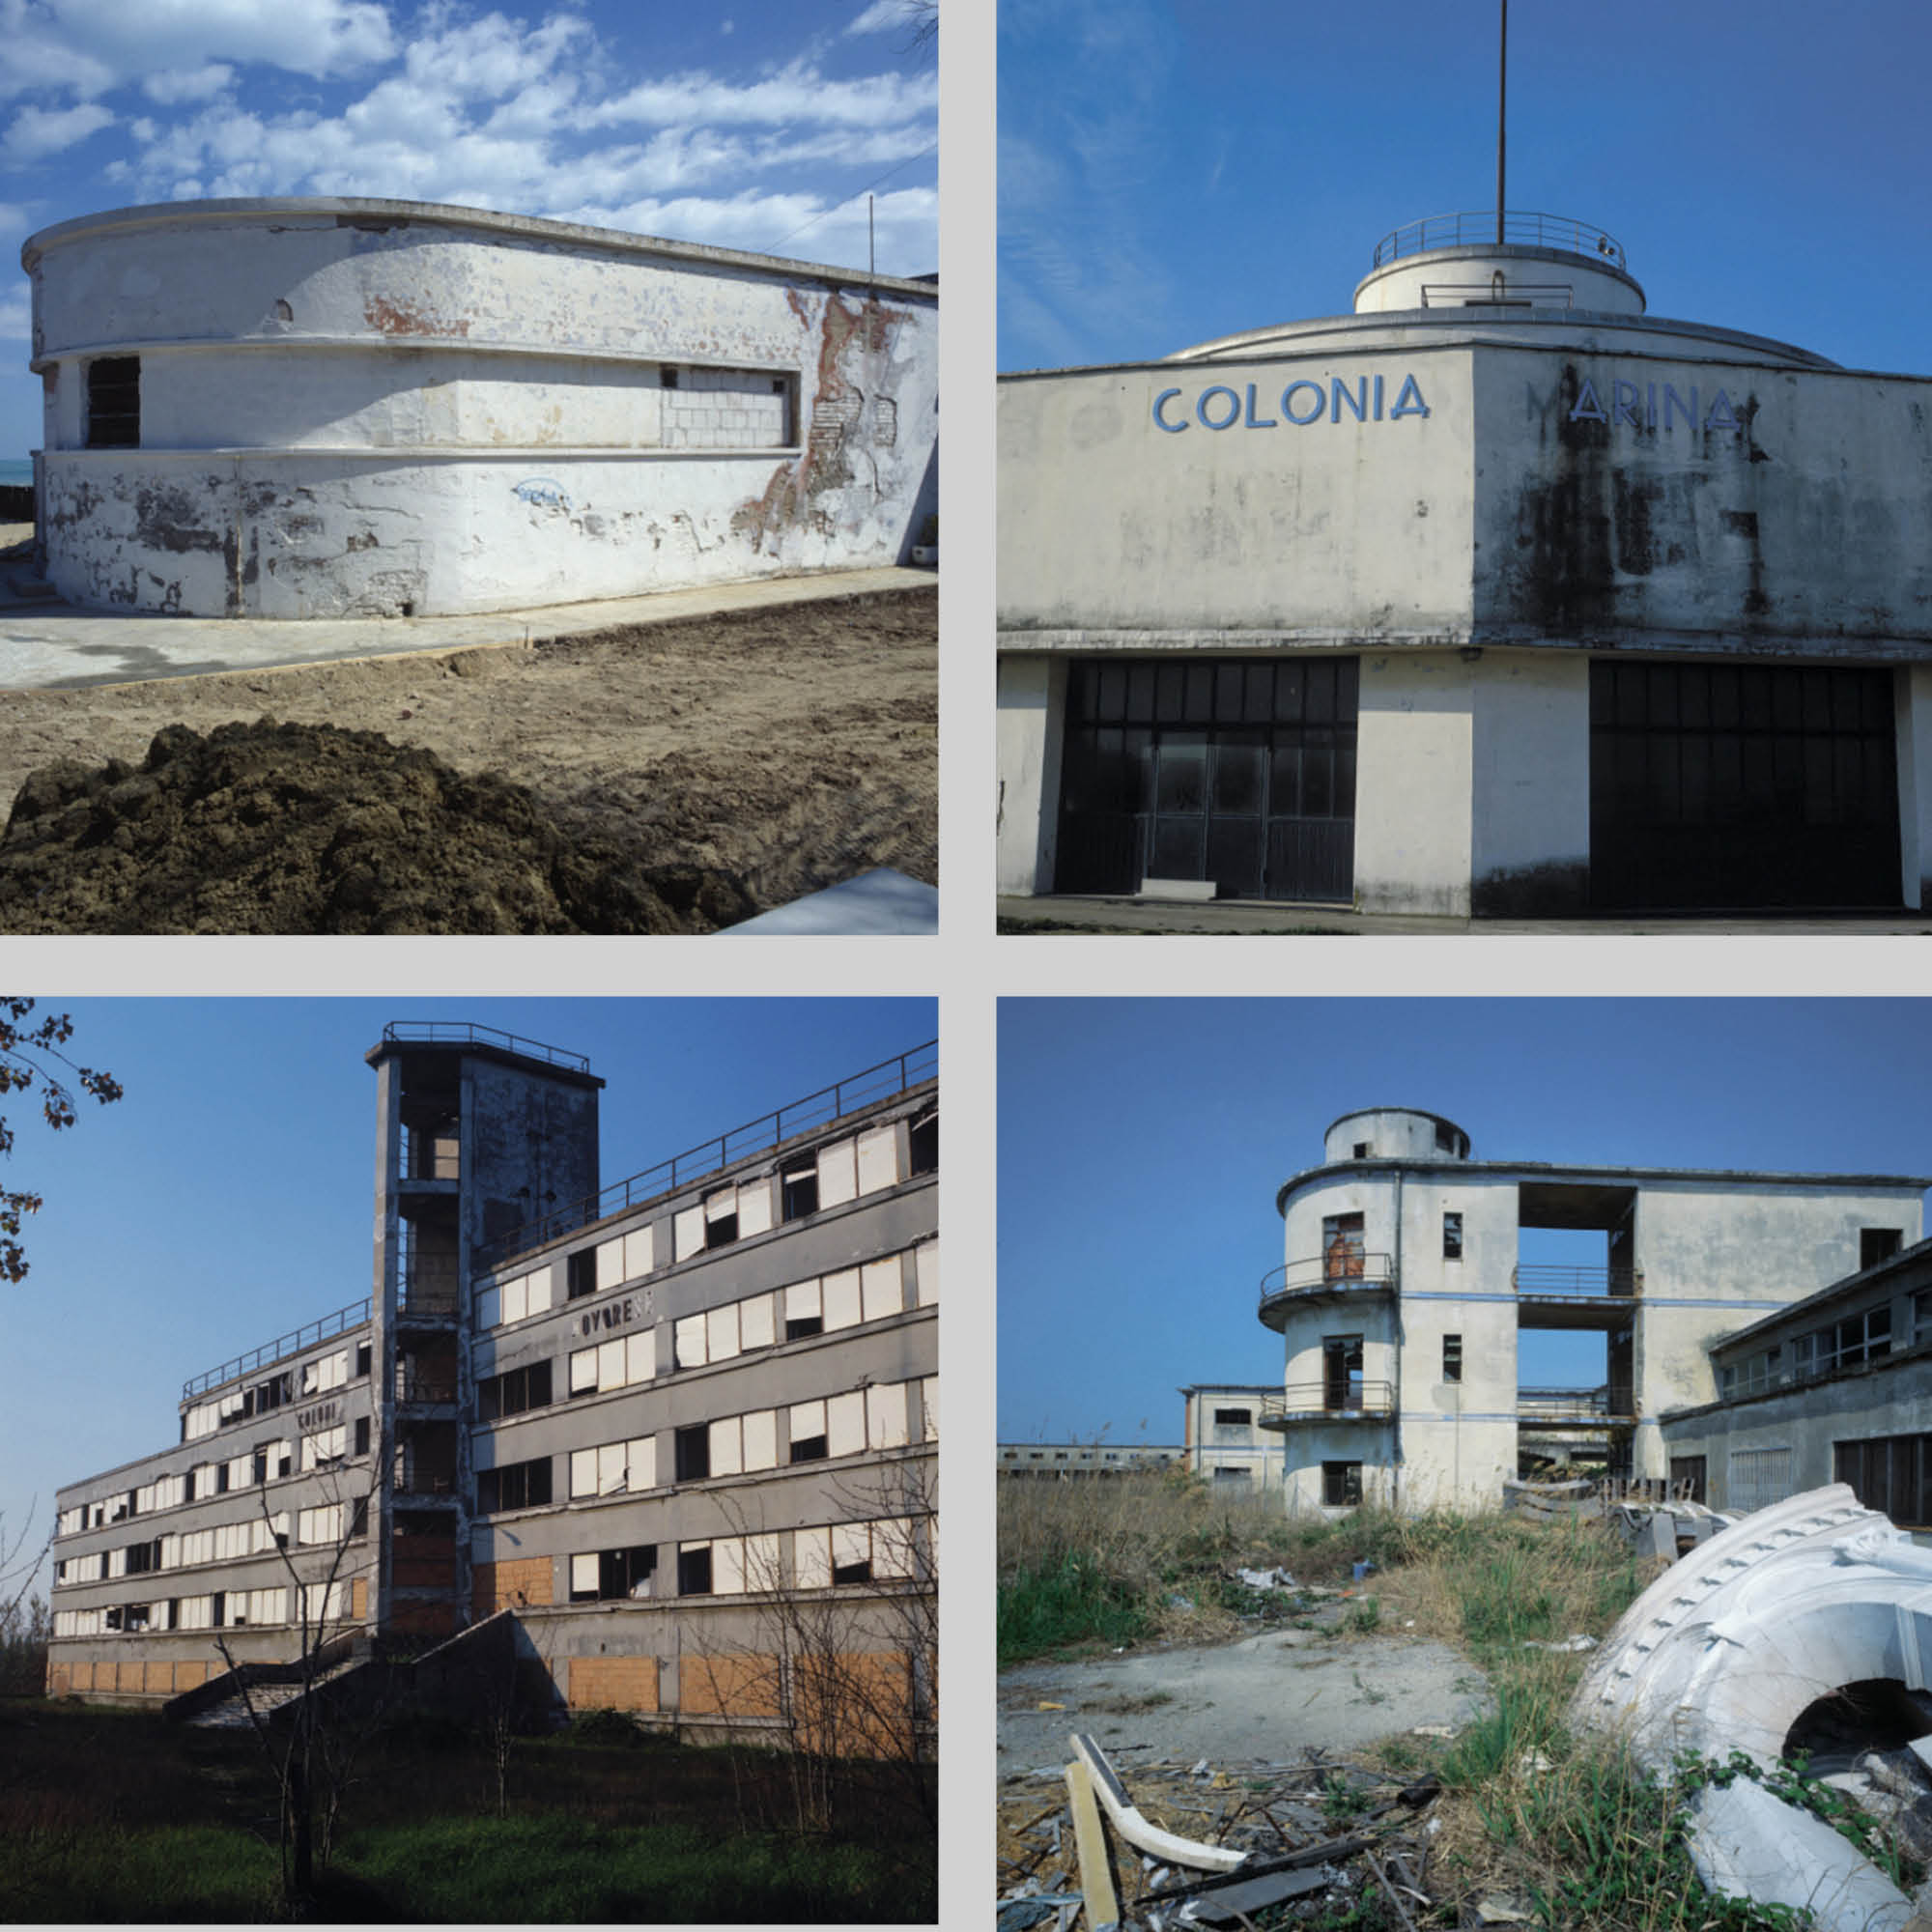 Four photographs showing a day colonia in Pesaro from circa 1934; currently a basketball center, the Colonia Marina Novarese in Rimini designed by Giuseppe Peverelli in 1934; last used in 1975, the main hall of Le Navi, and a Colonia for girls in Tirrenia designed by Mario Paniconi and Giulo Pediconi in 1934, now used as a parking lot in summer months.